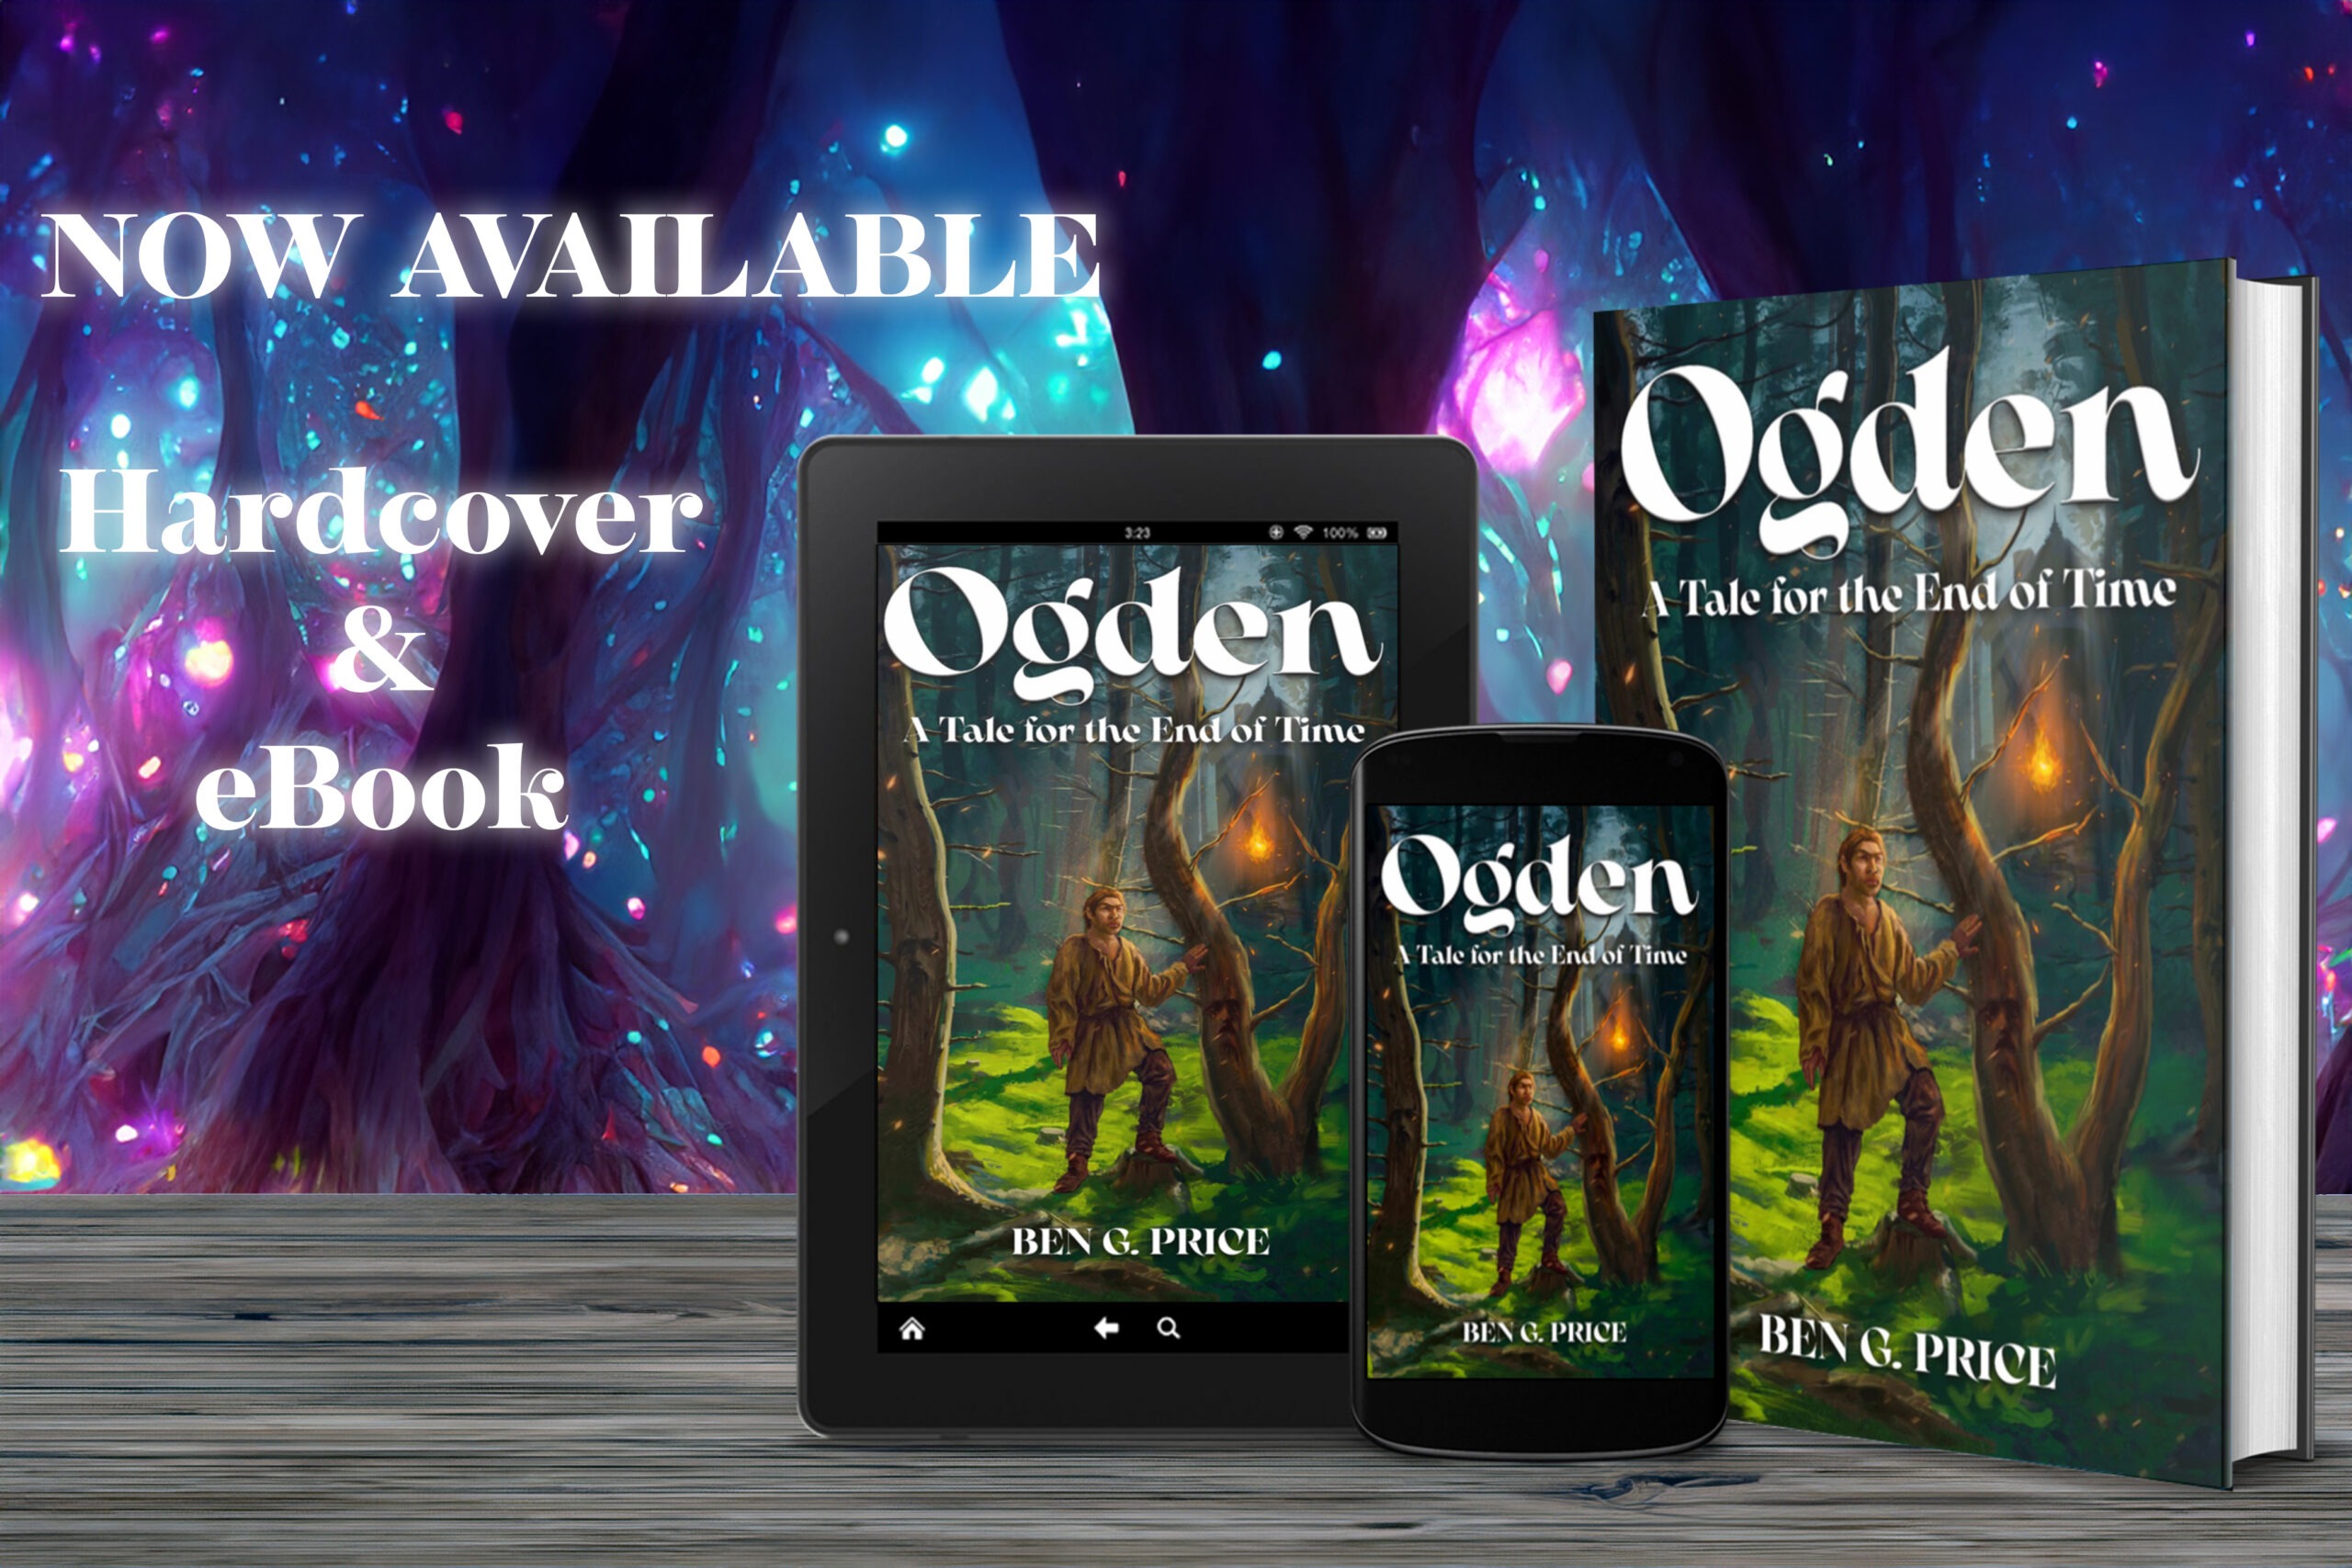 Ogden: A Tale for the End of Time by Ben G. Price,  now available from Histria Books